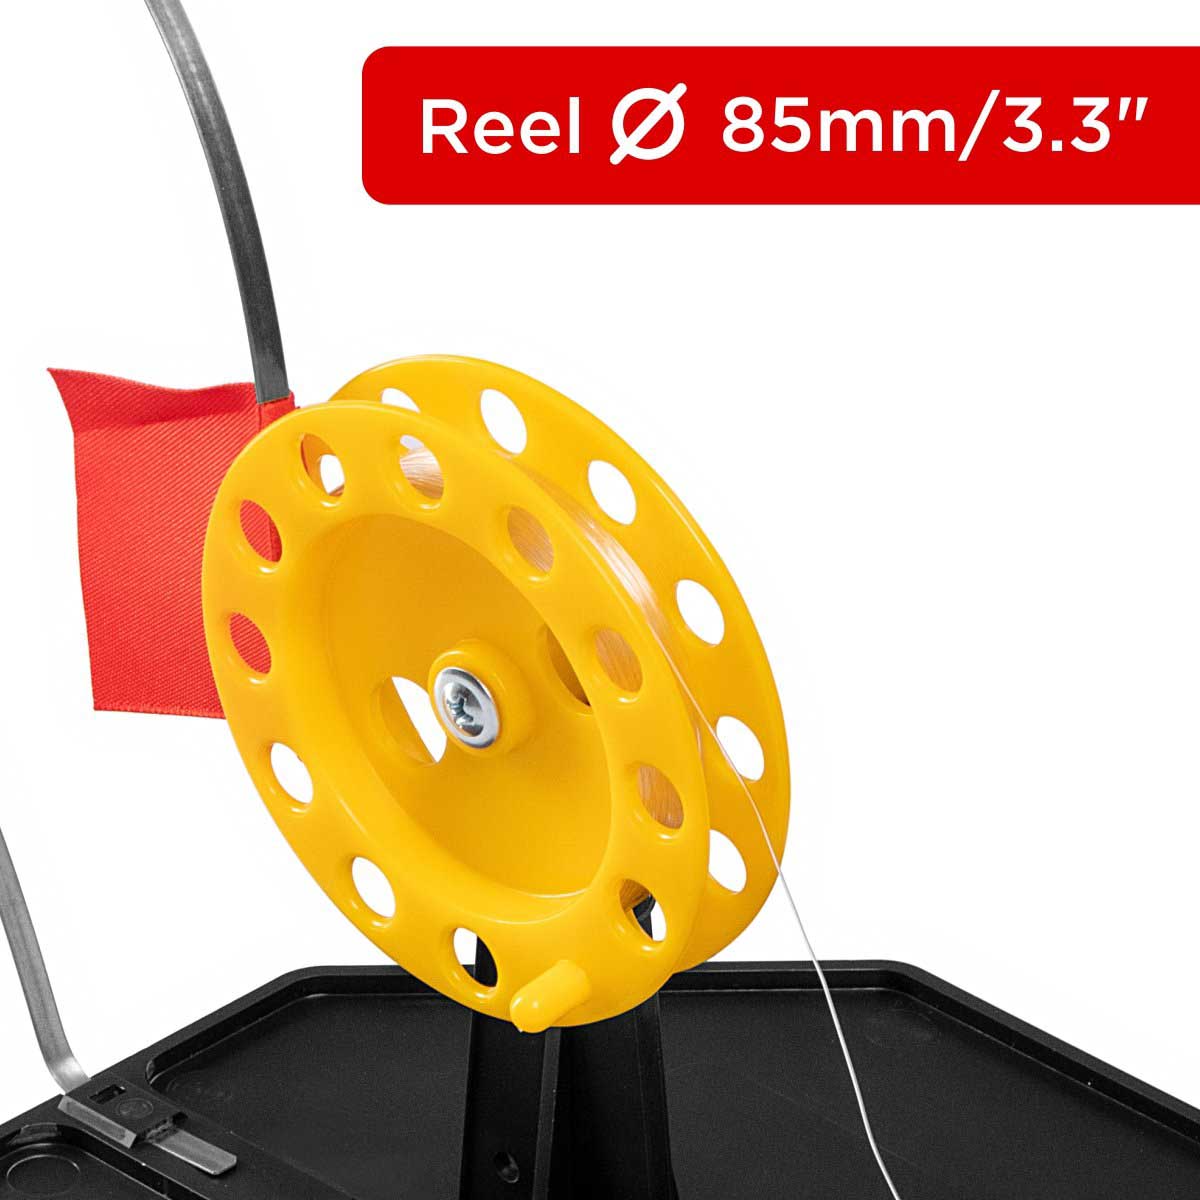 Tip-up Pop-Up Integrated Hole-Cover Easy to Clip has either 2.5 inches, or 3.3 inches spool diameter